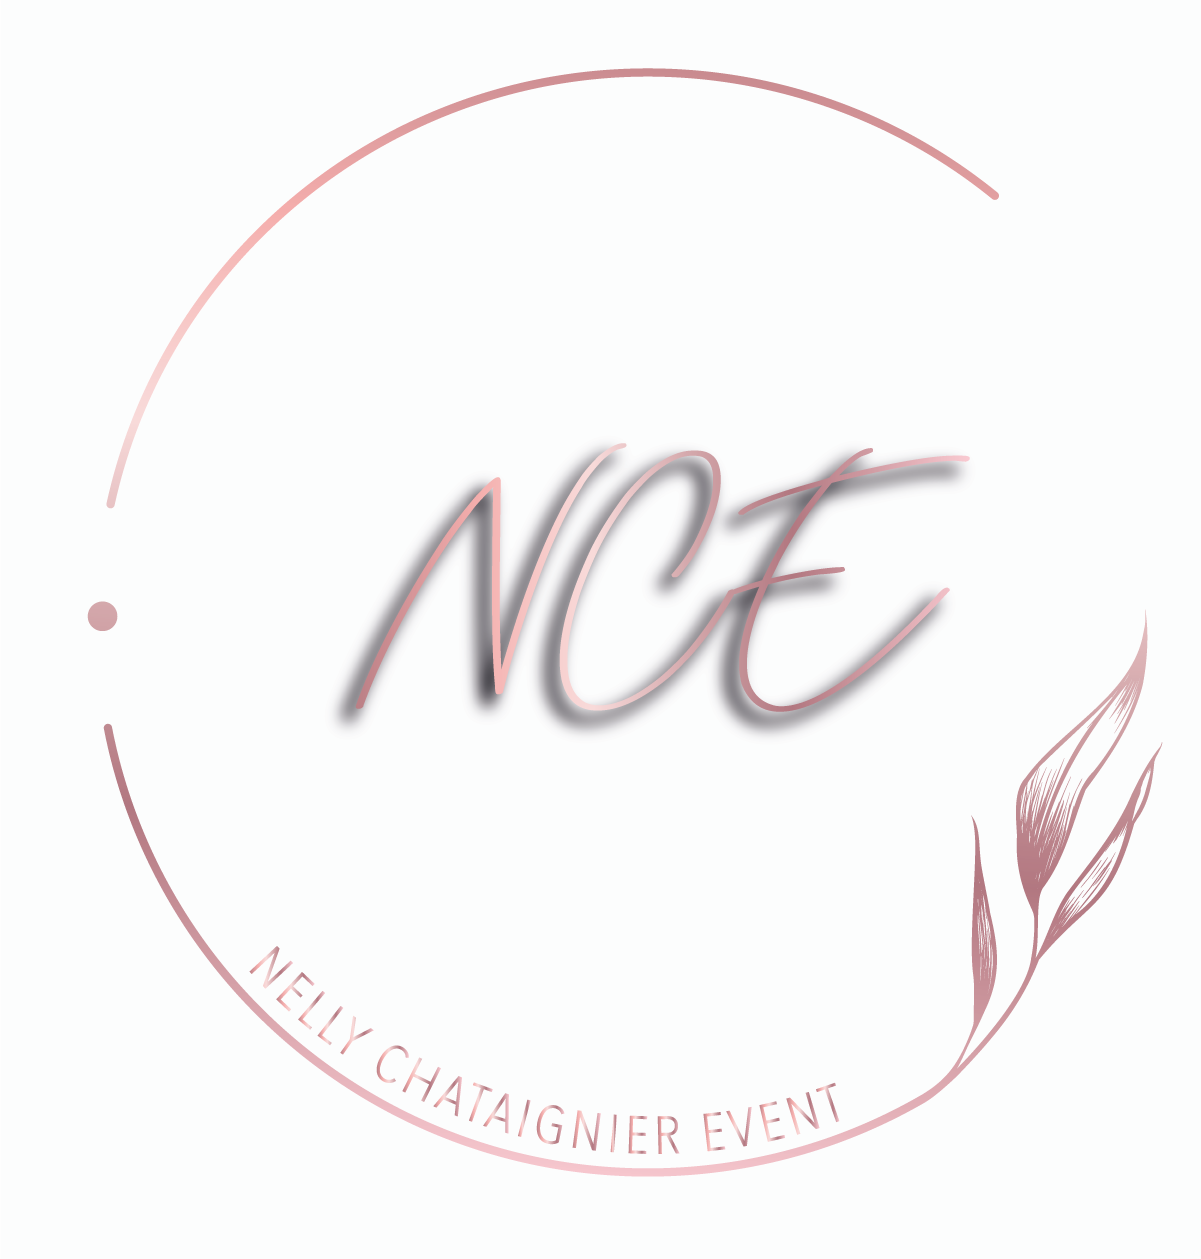 NCE- NELLY CHATAIGNIER EVENTS